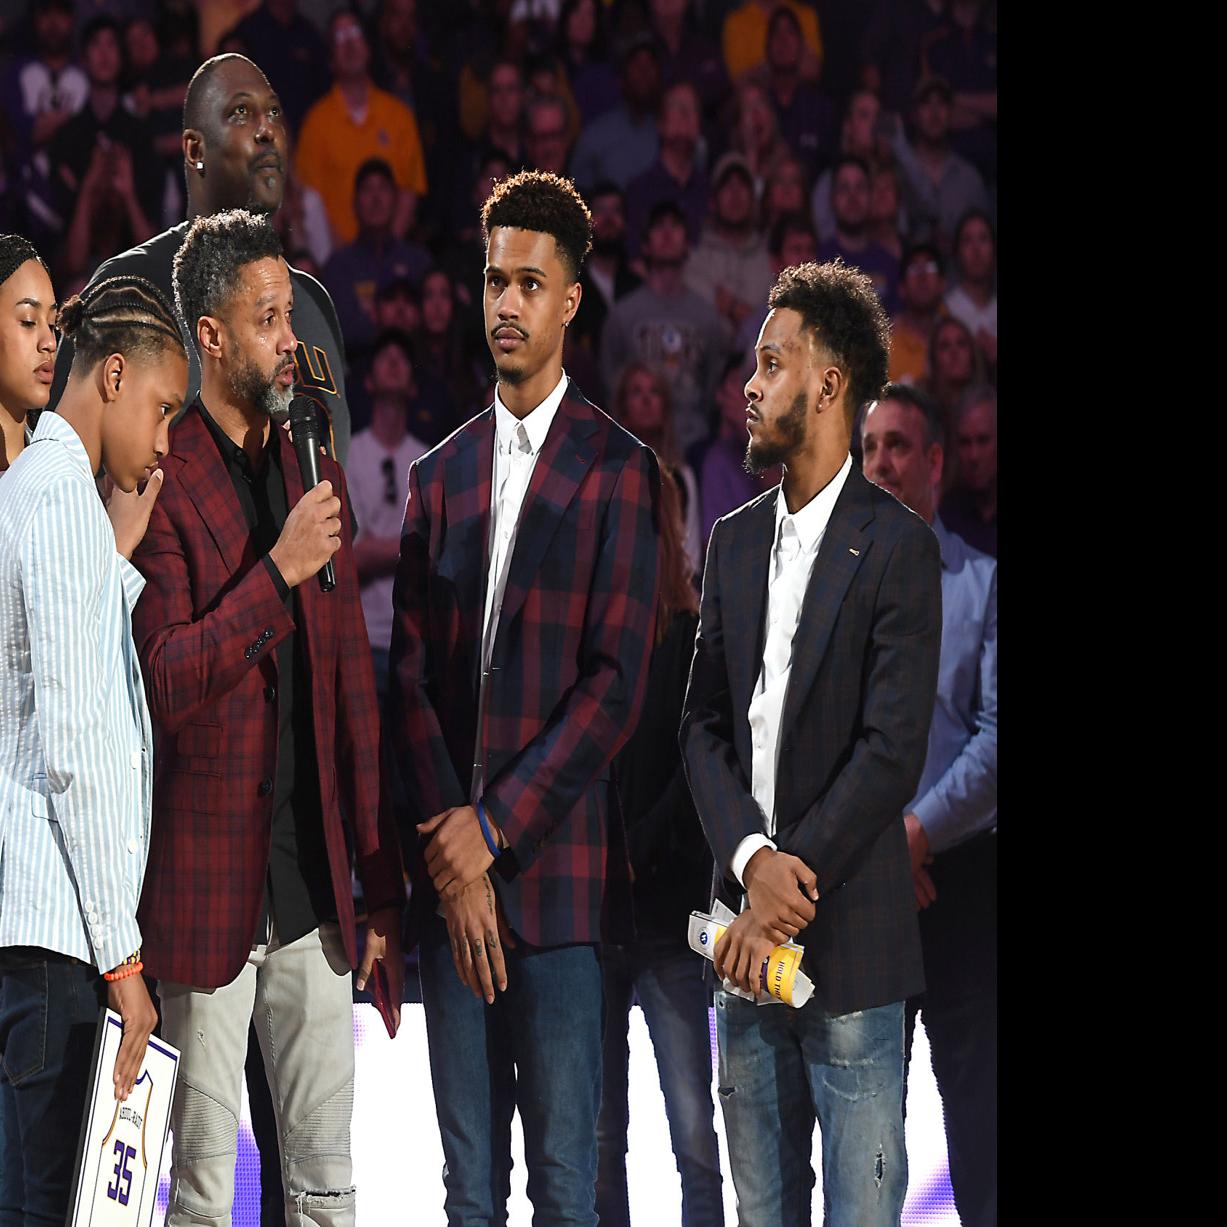 His dynamic LSU hoops days are just part of Mahmoud Abdul-Rauf's